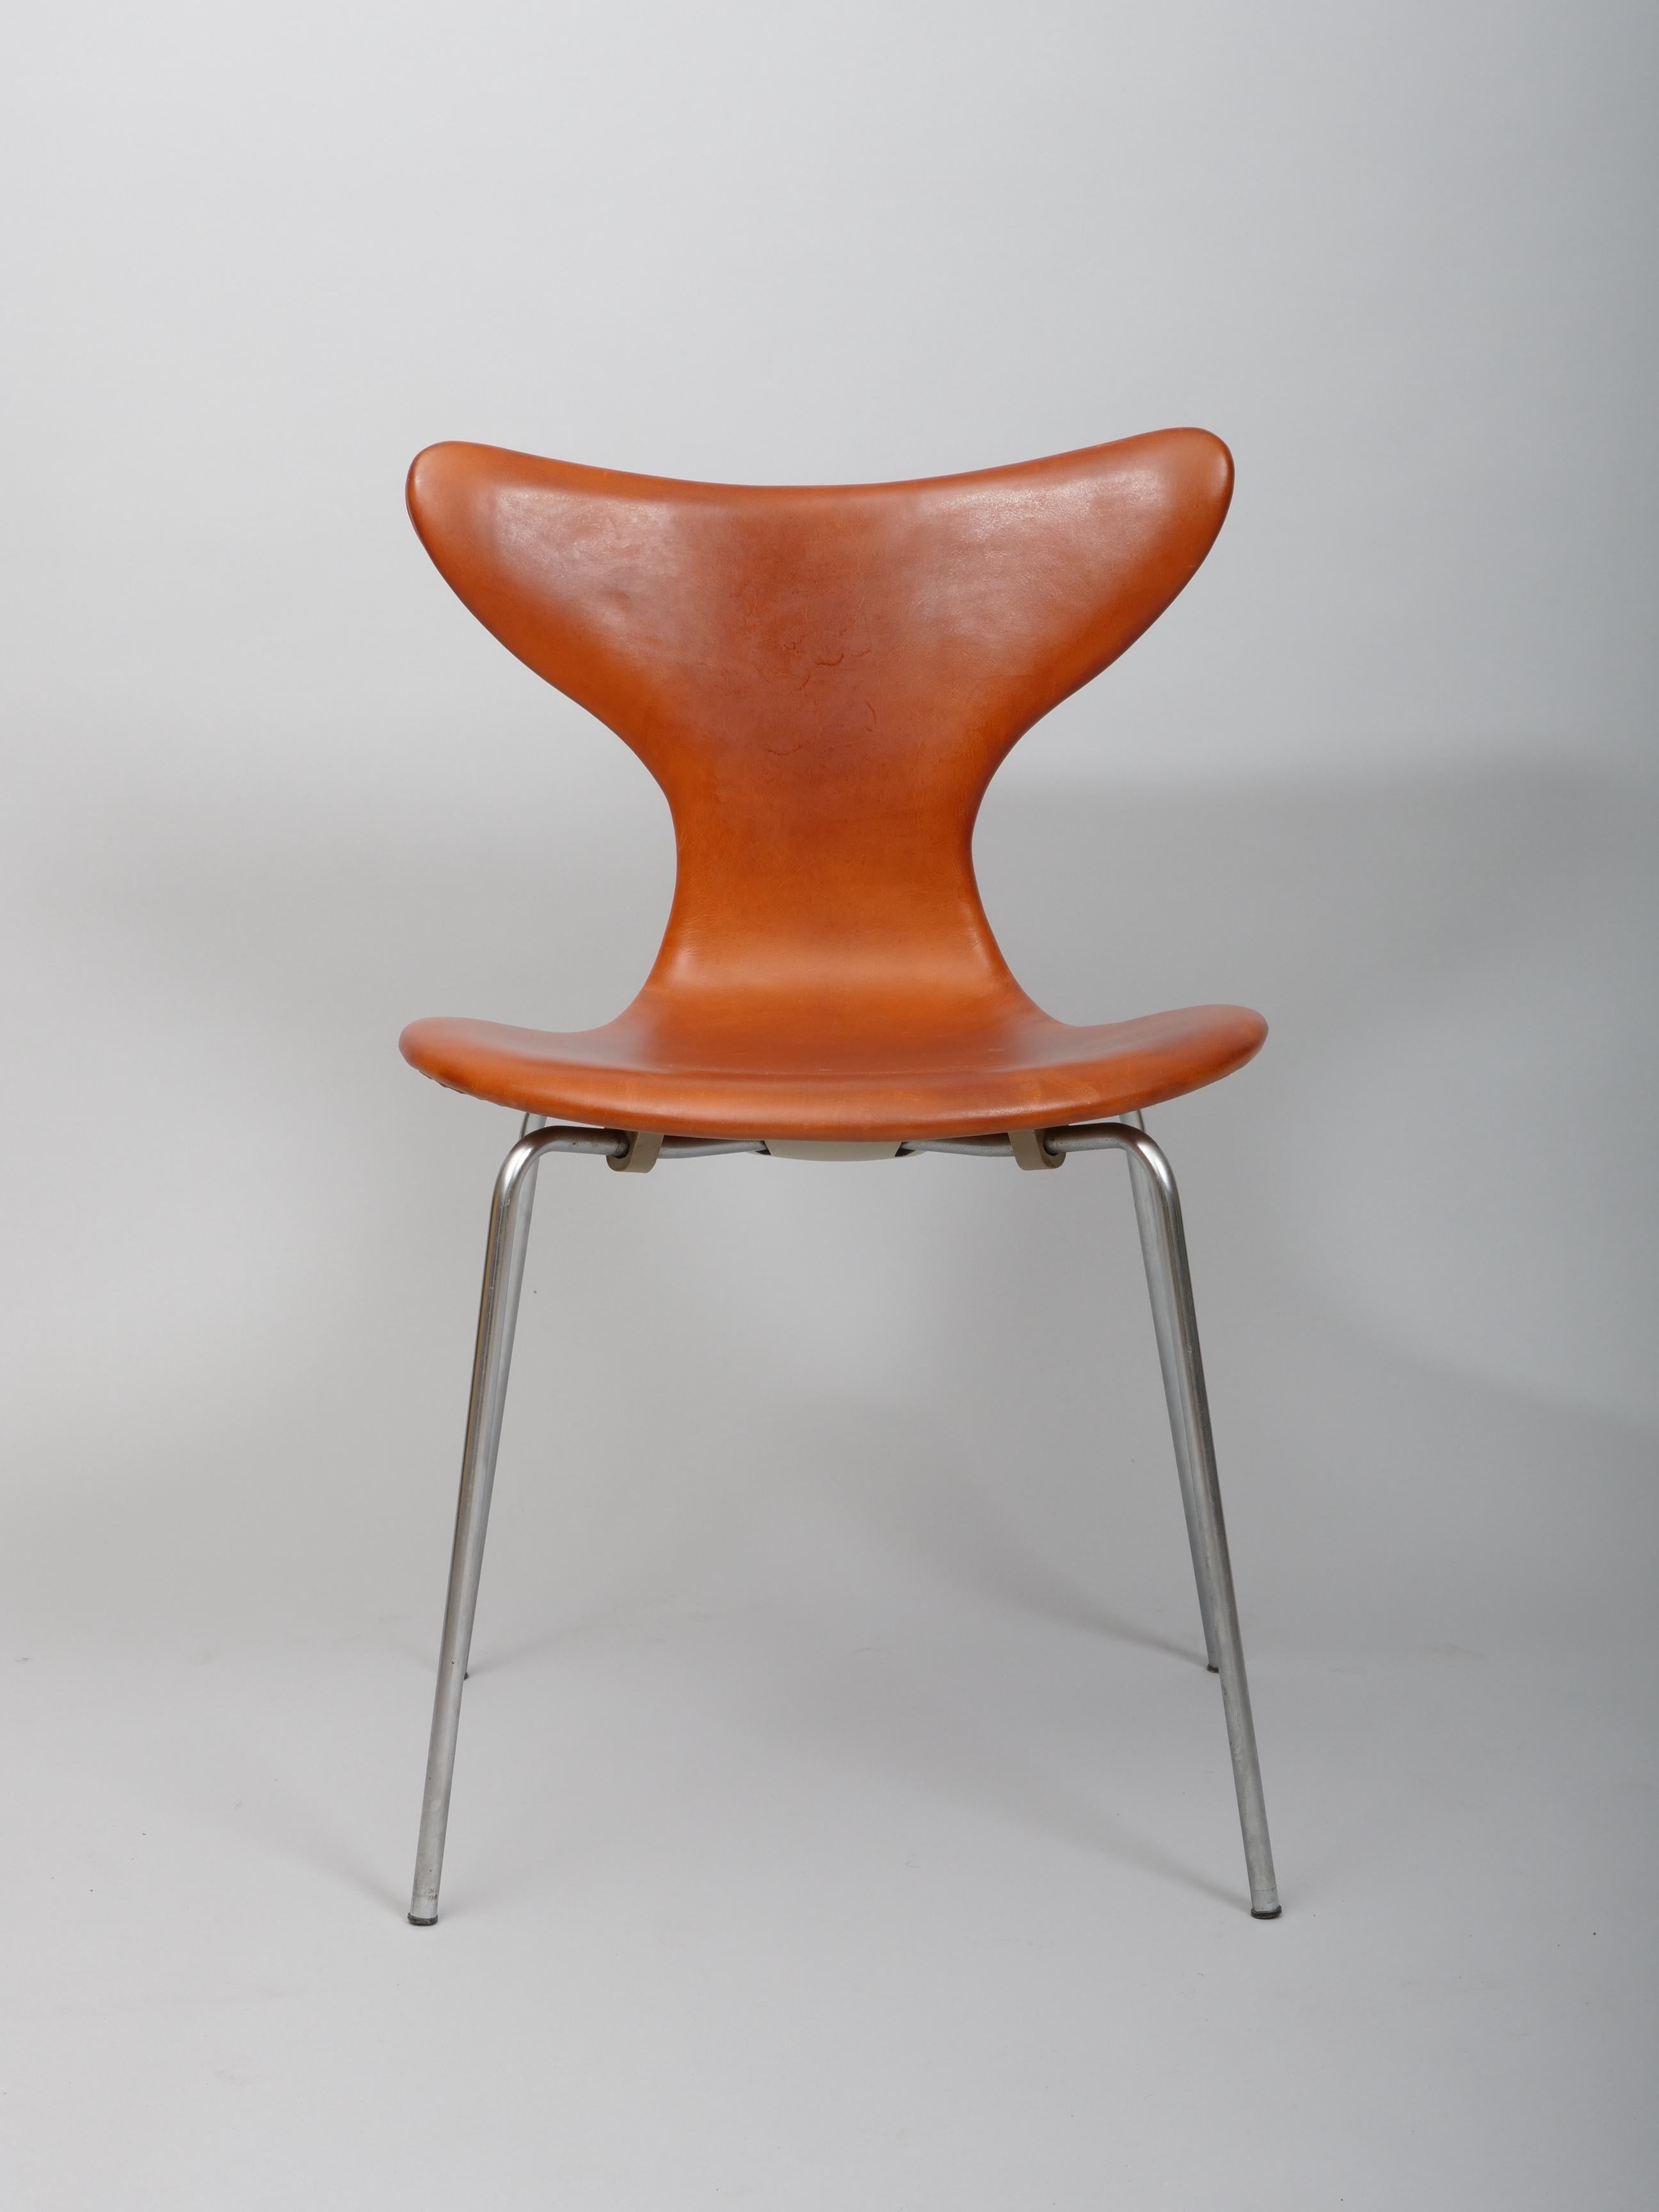 Set of 12 'Lily' chairs with lovely patina. 

The 'Lily' chair has the most striking contrast between the wide back and the narrow waist. The flowing lines inspired the chair’s name. 

The design was launched in 1969. One of Arne Jacobson's most